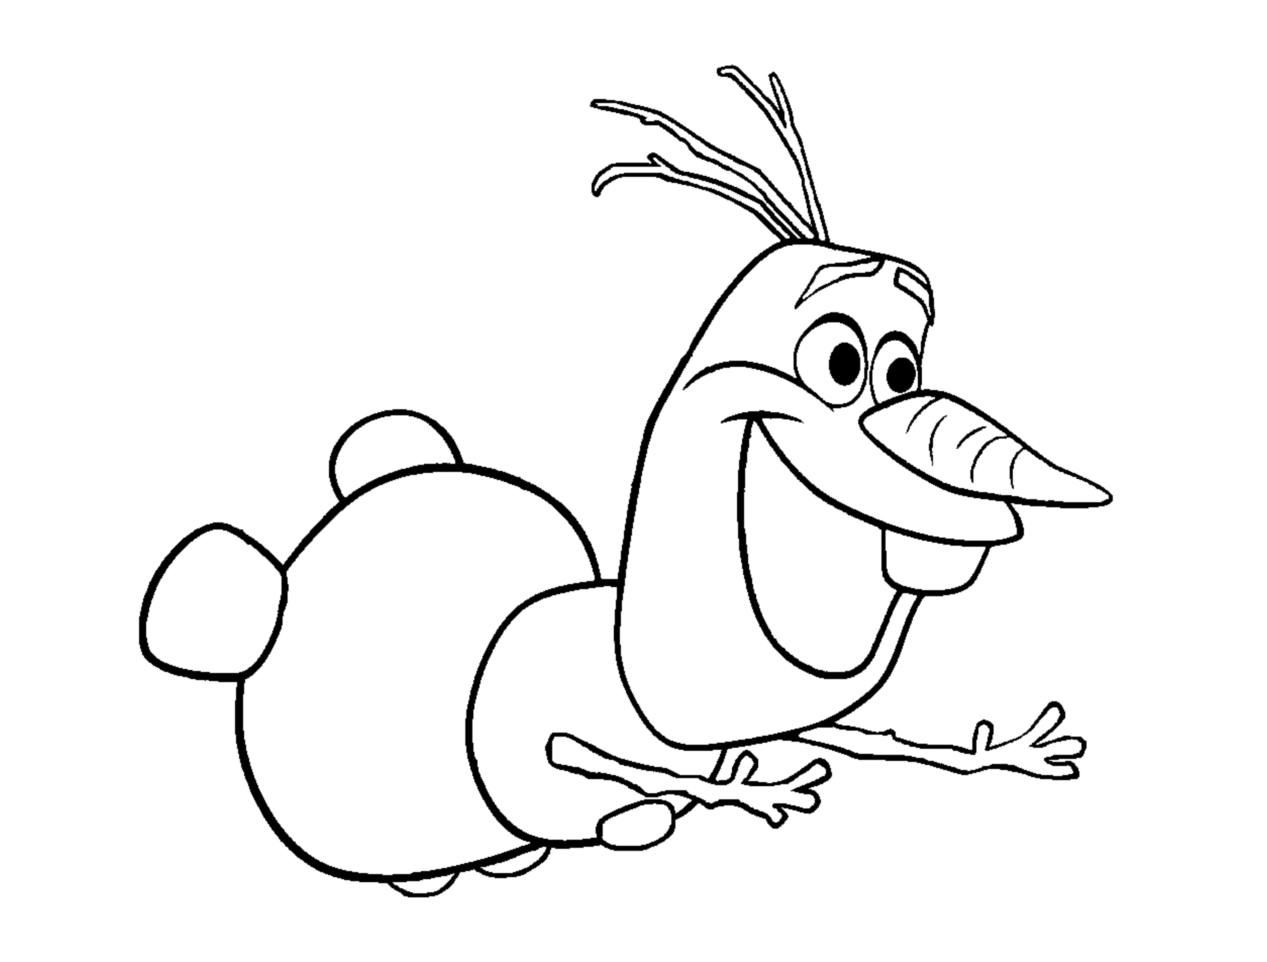  Olaf Snowman Coloring Pages For Kids